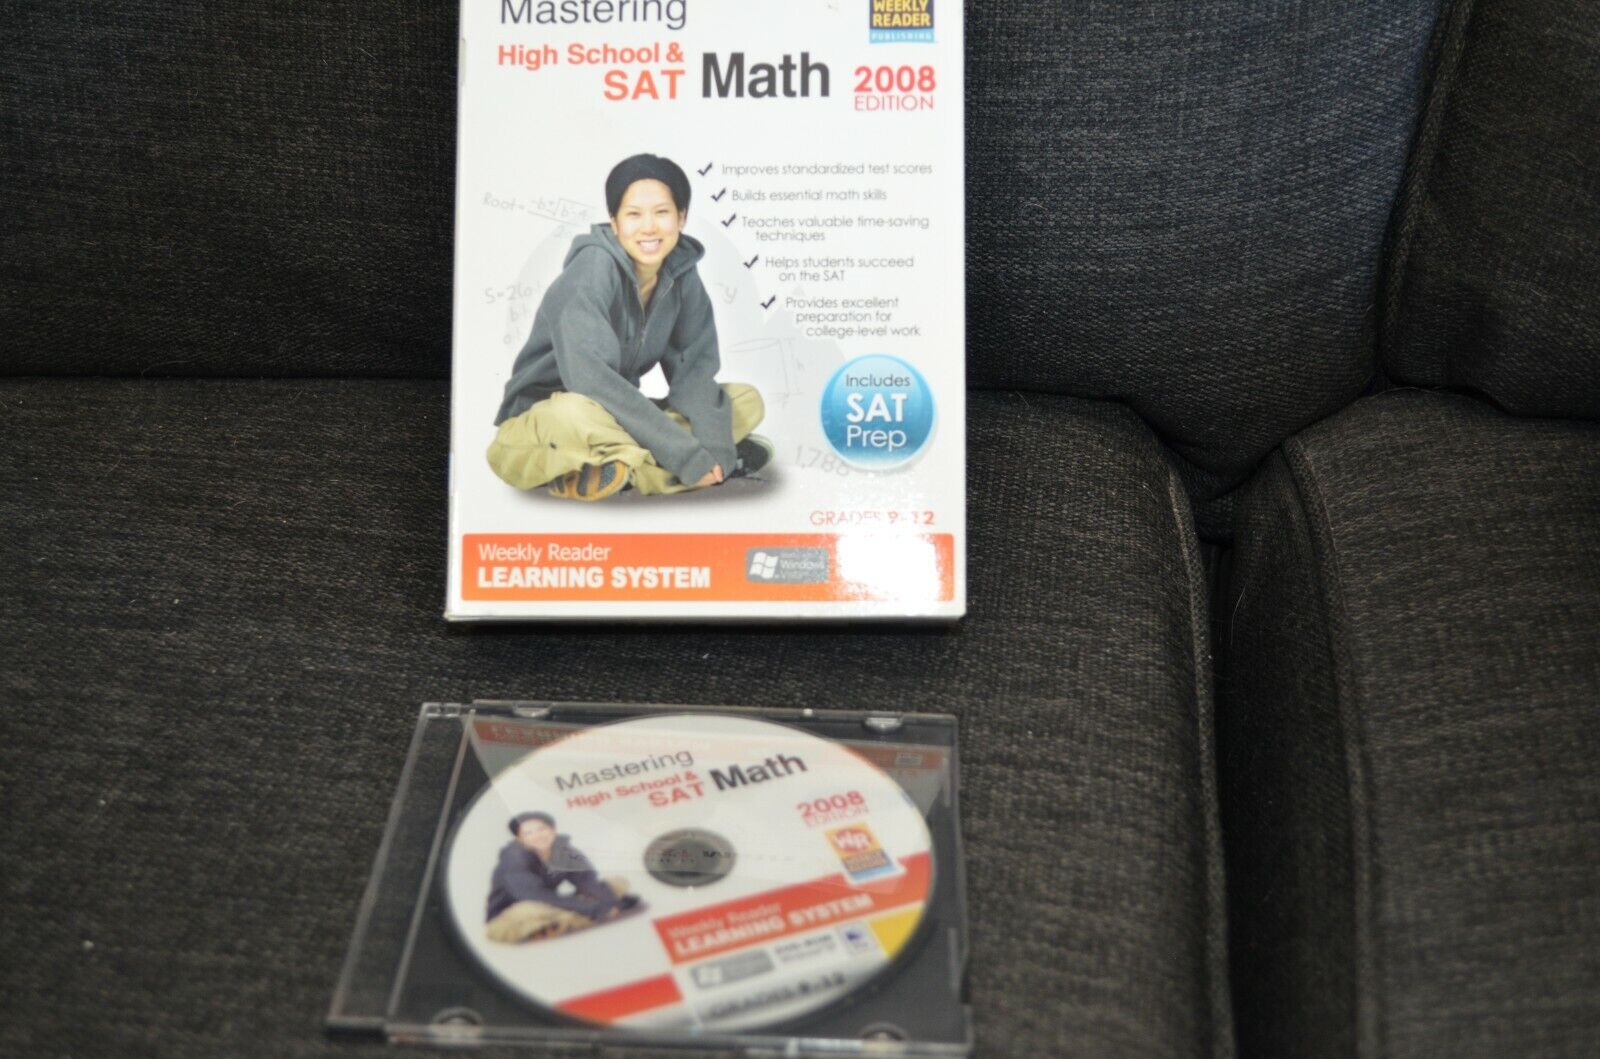 WR MASTERING HIGH SCHOOL AND SAT MATH 2008 EDITION DVD